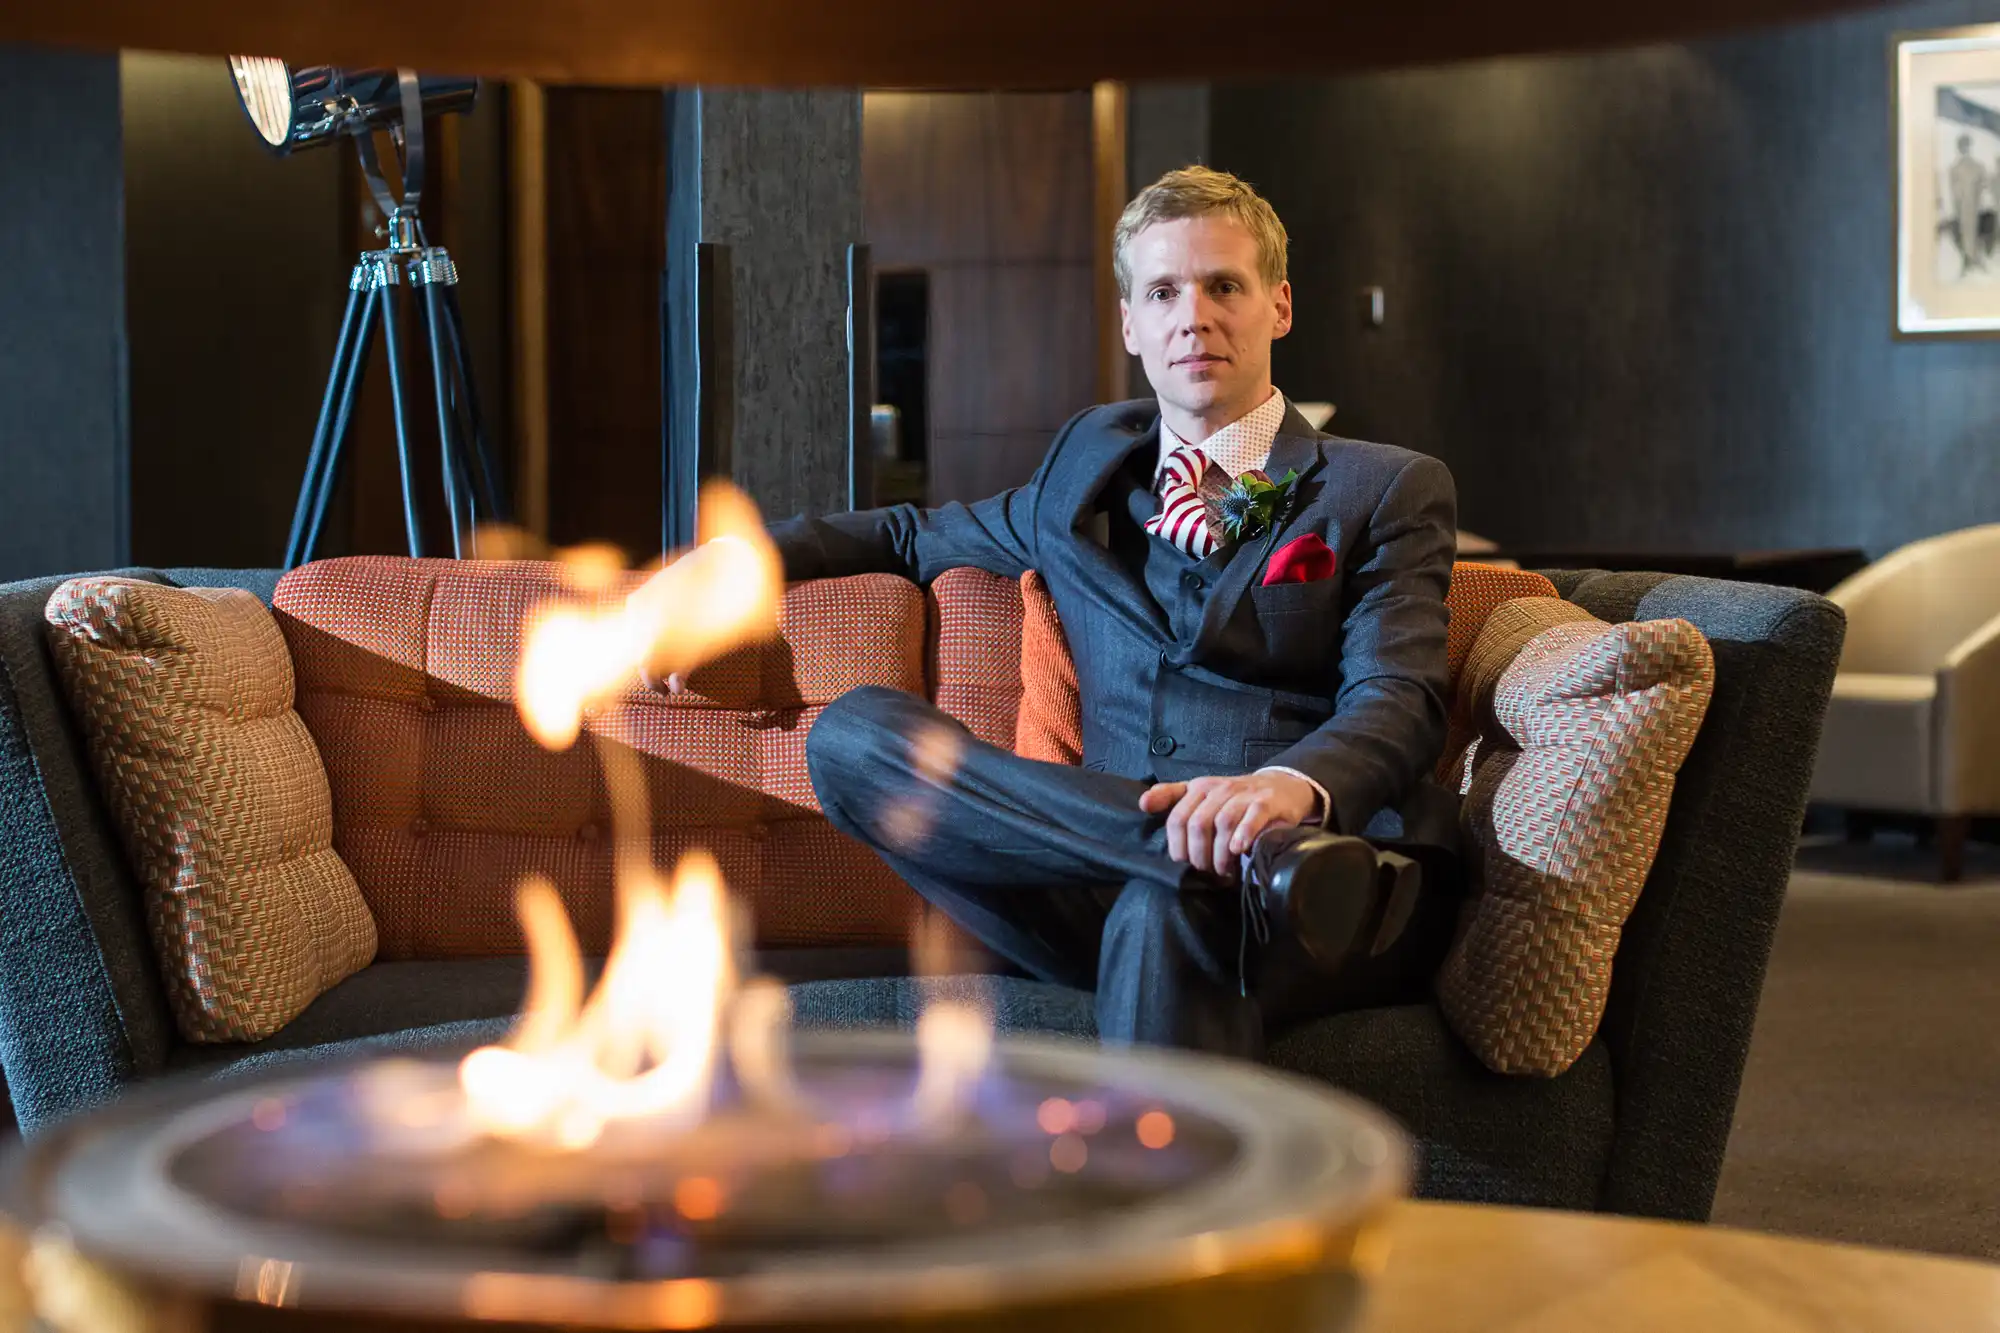 A man in a suit with a boutonniere sits on a couch beside a tabletop fire pit in a stylish, dimly lit lounge.